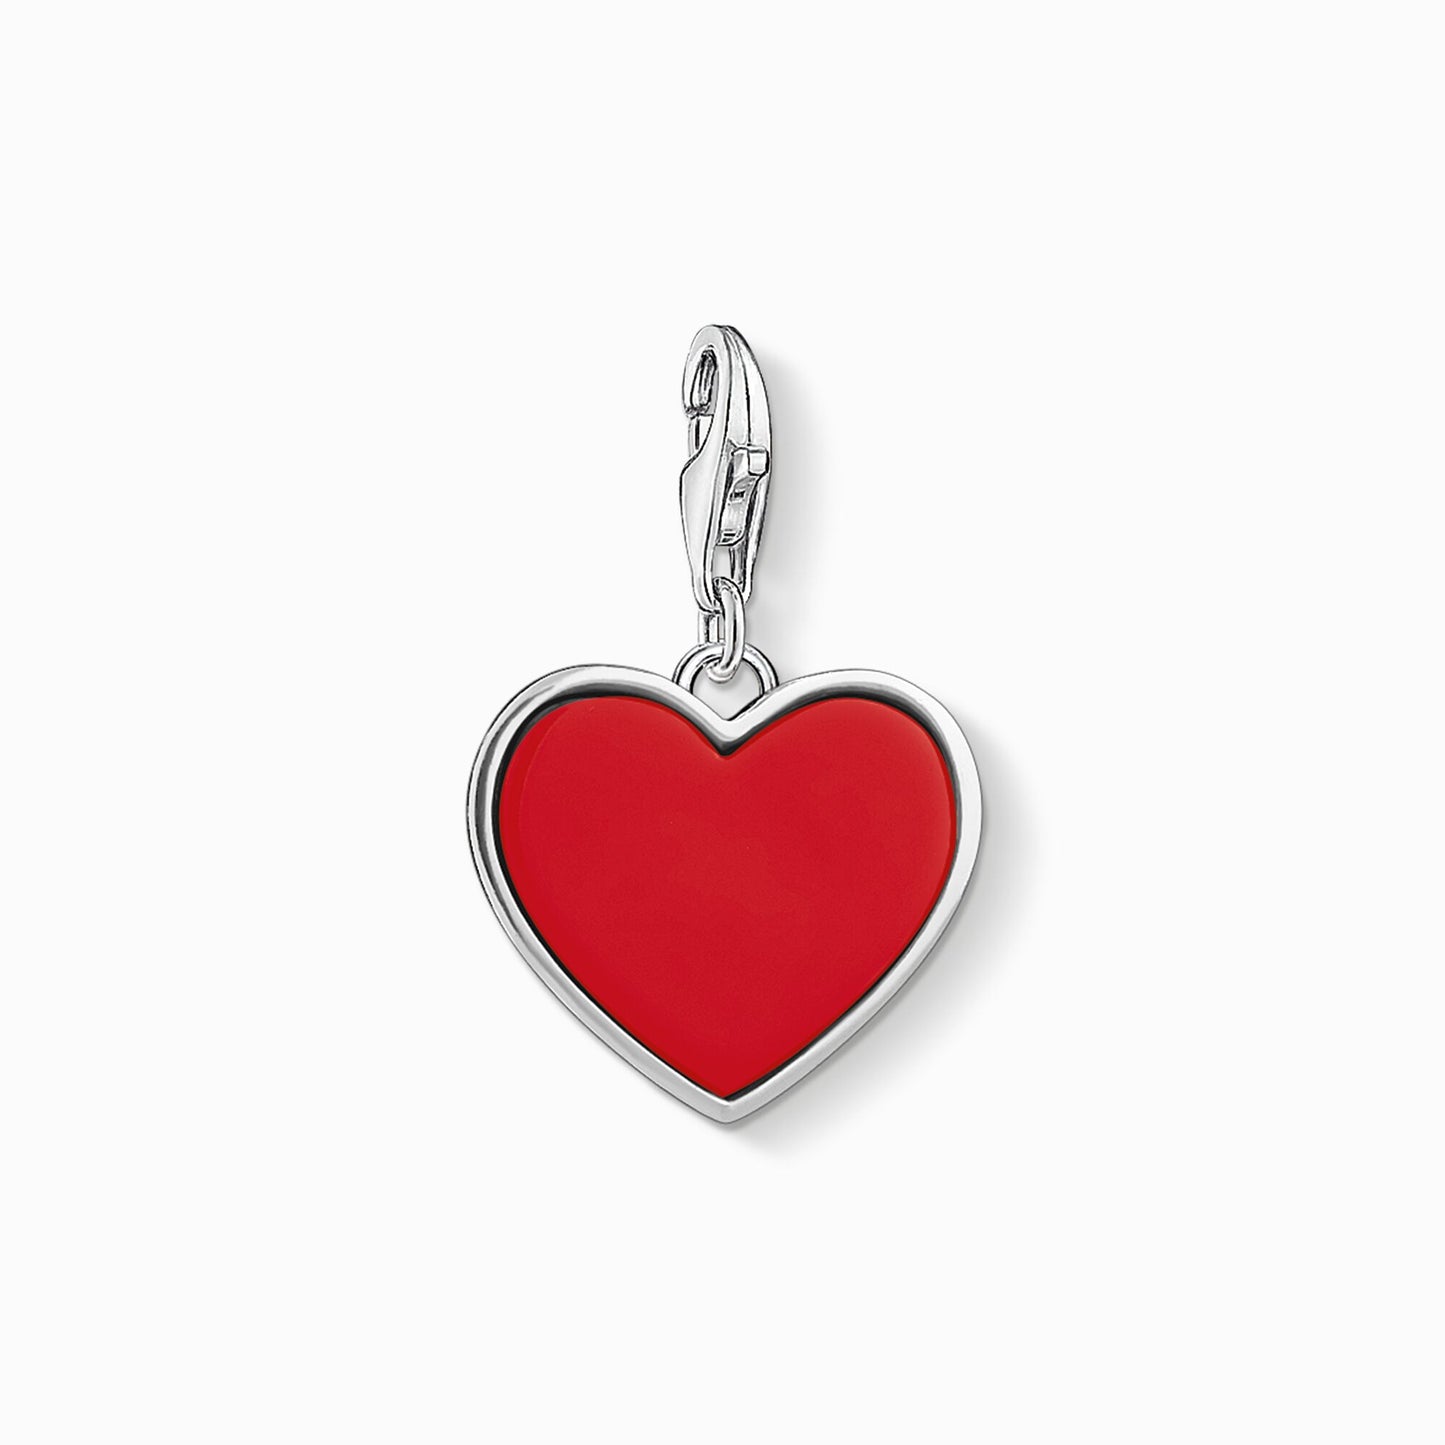 Charm pendant red heart 1471-337-10